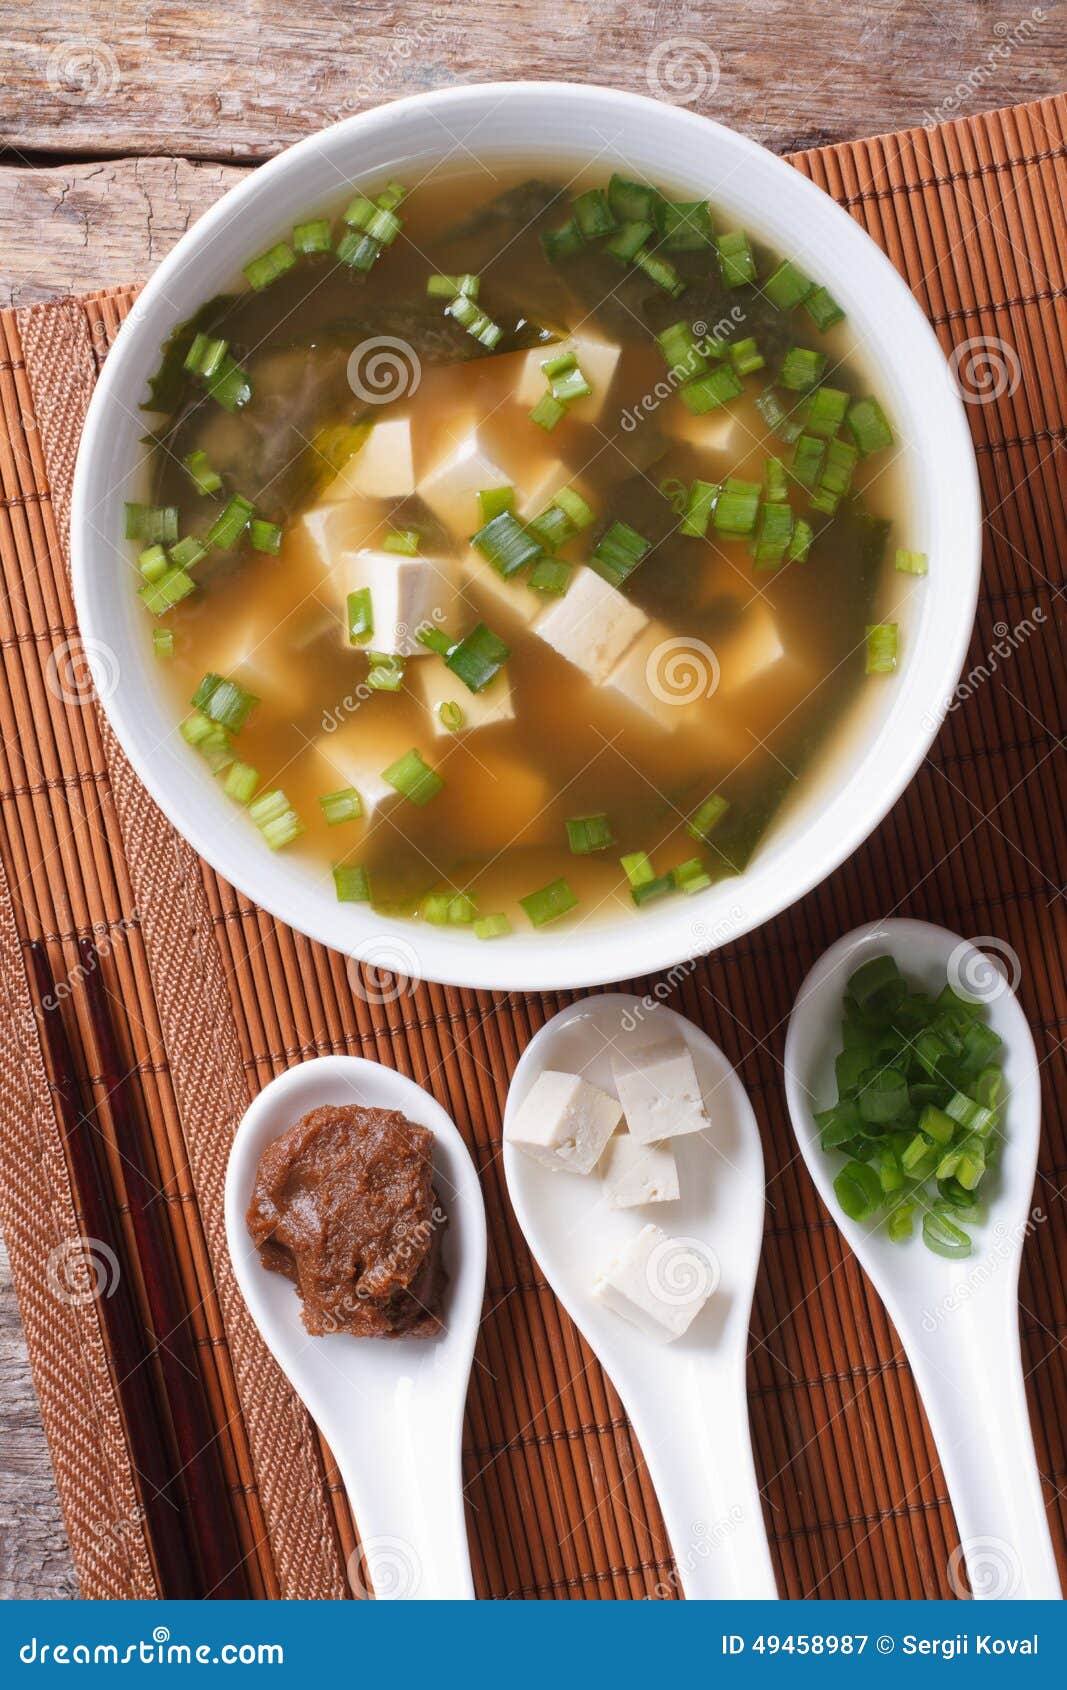 Japanese Miso Soup and Ingredients. Top View Vertical Stock Image ...